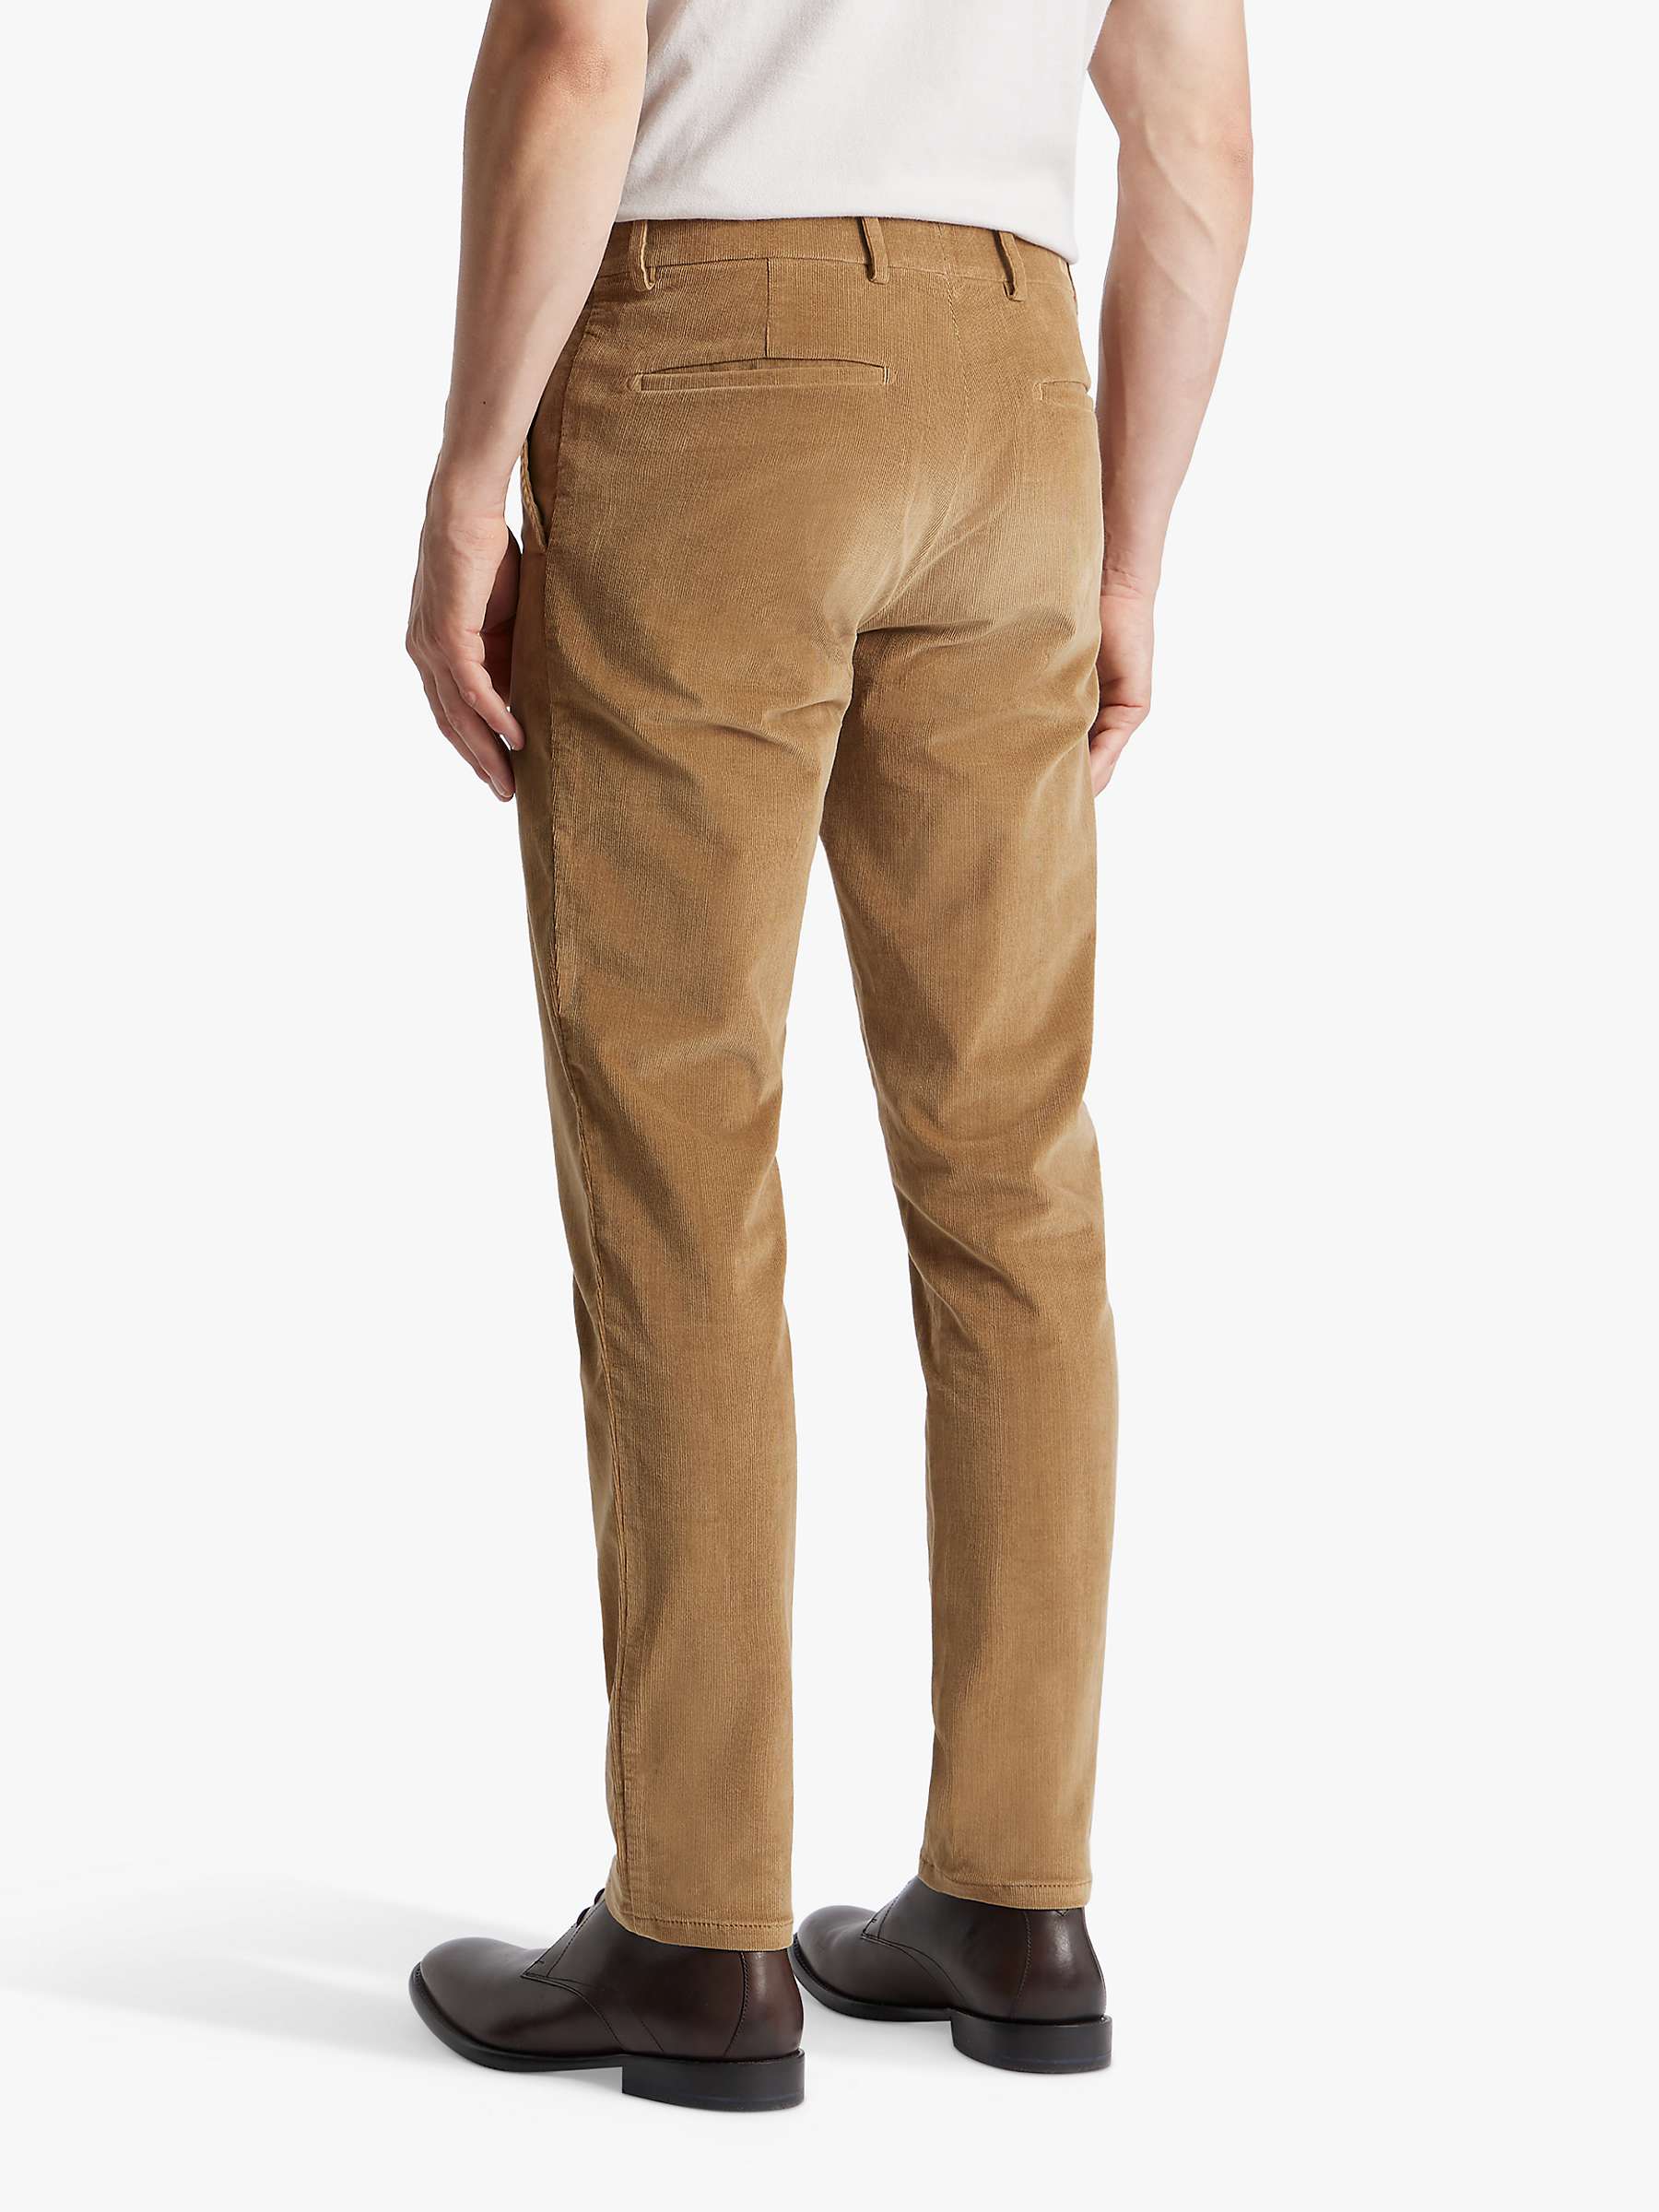 Buy SPOKE Cord Sharps Broad Thigh Trousers Online at johnlewis.com